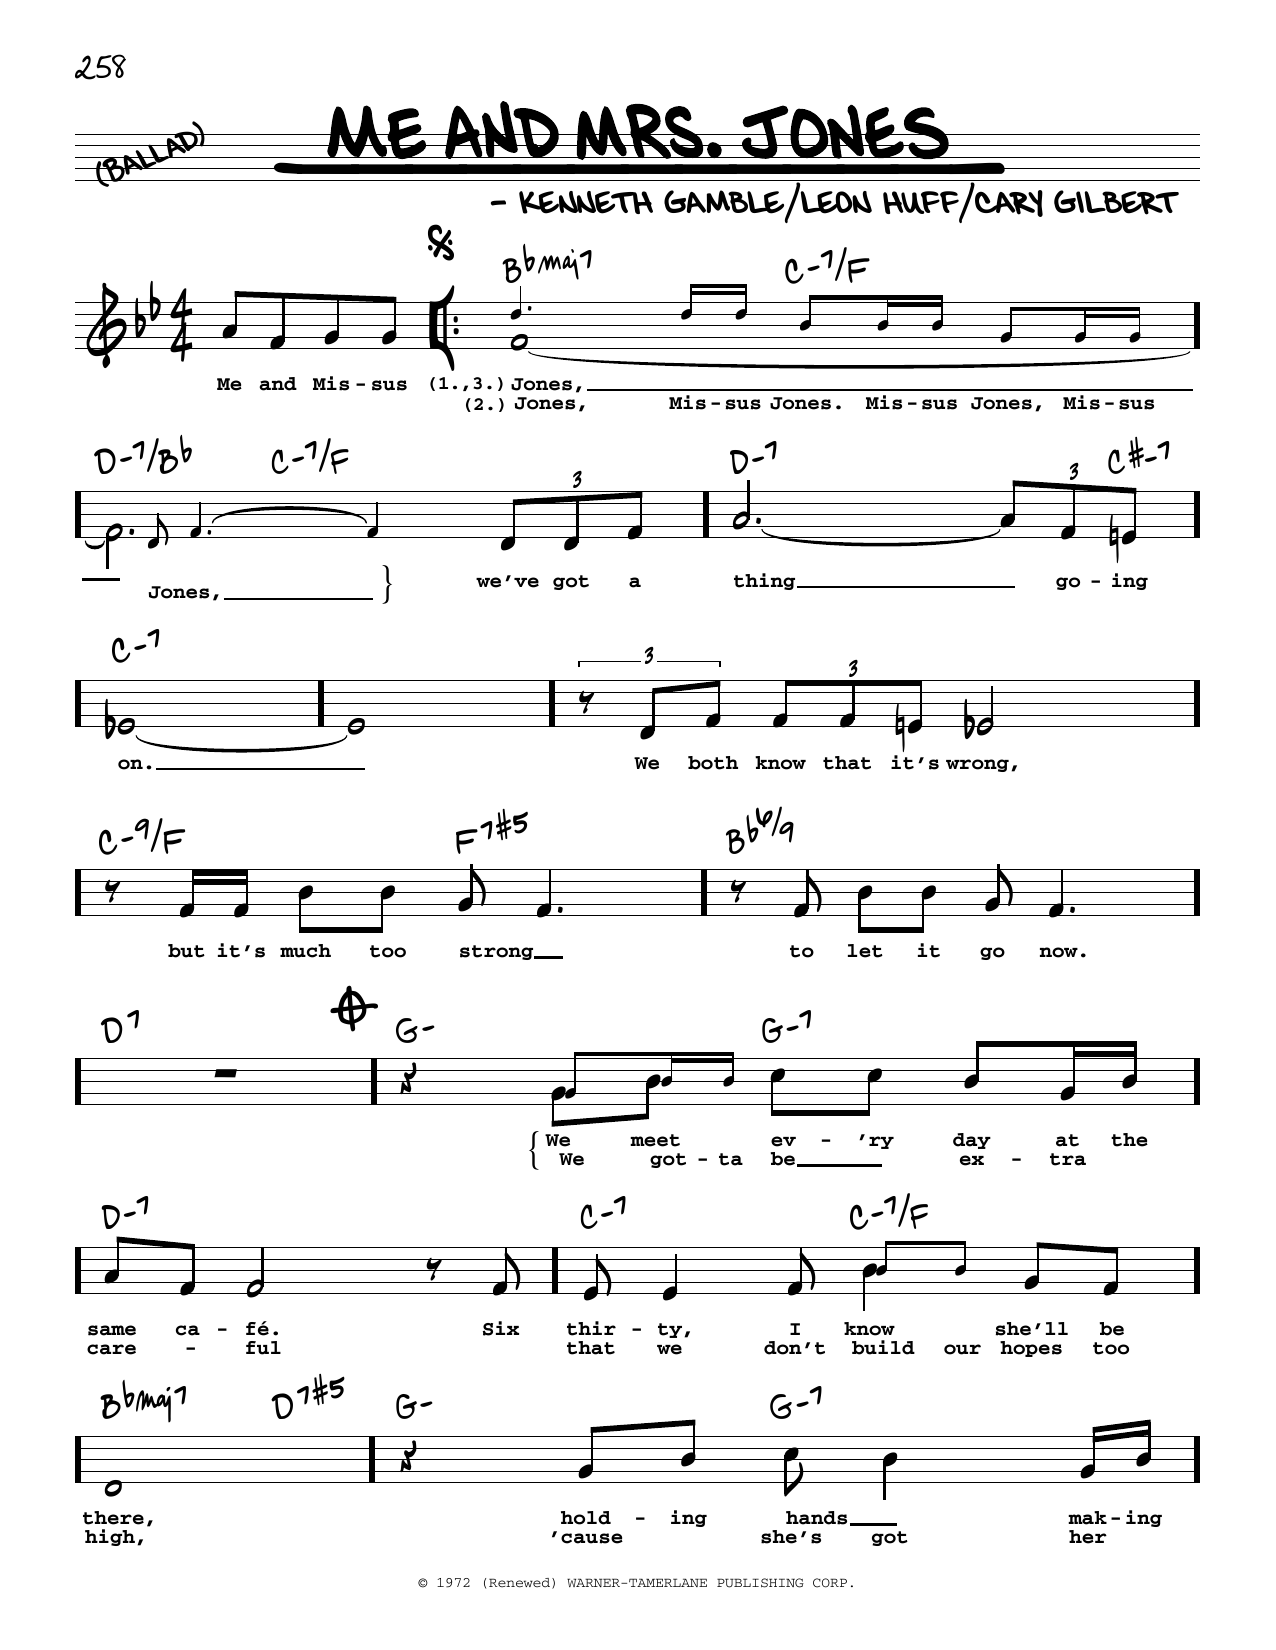 Download Cary Gilbert Me And Mrs. Jones (High Voice) Sheet Music